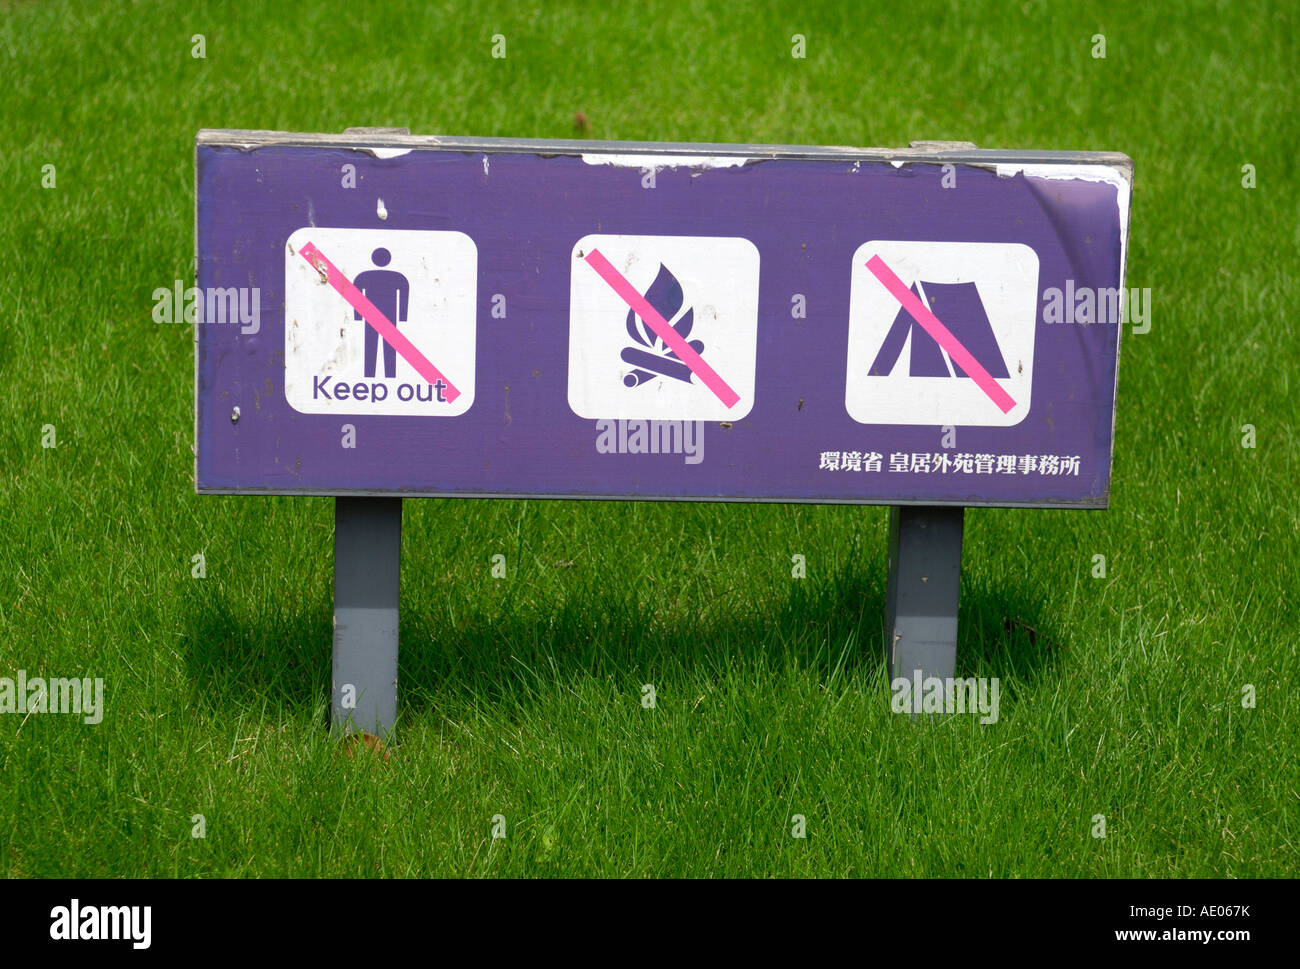 Sign board at imperial palace garden Stock Photo